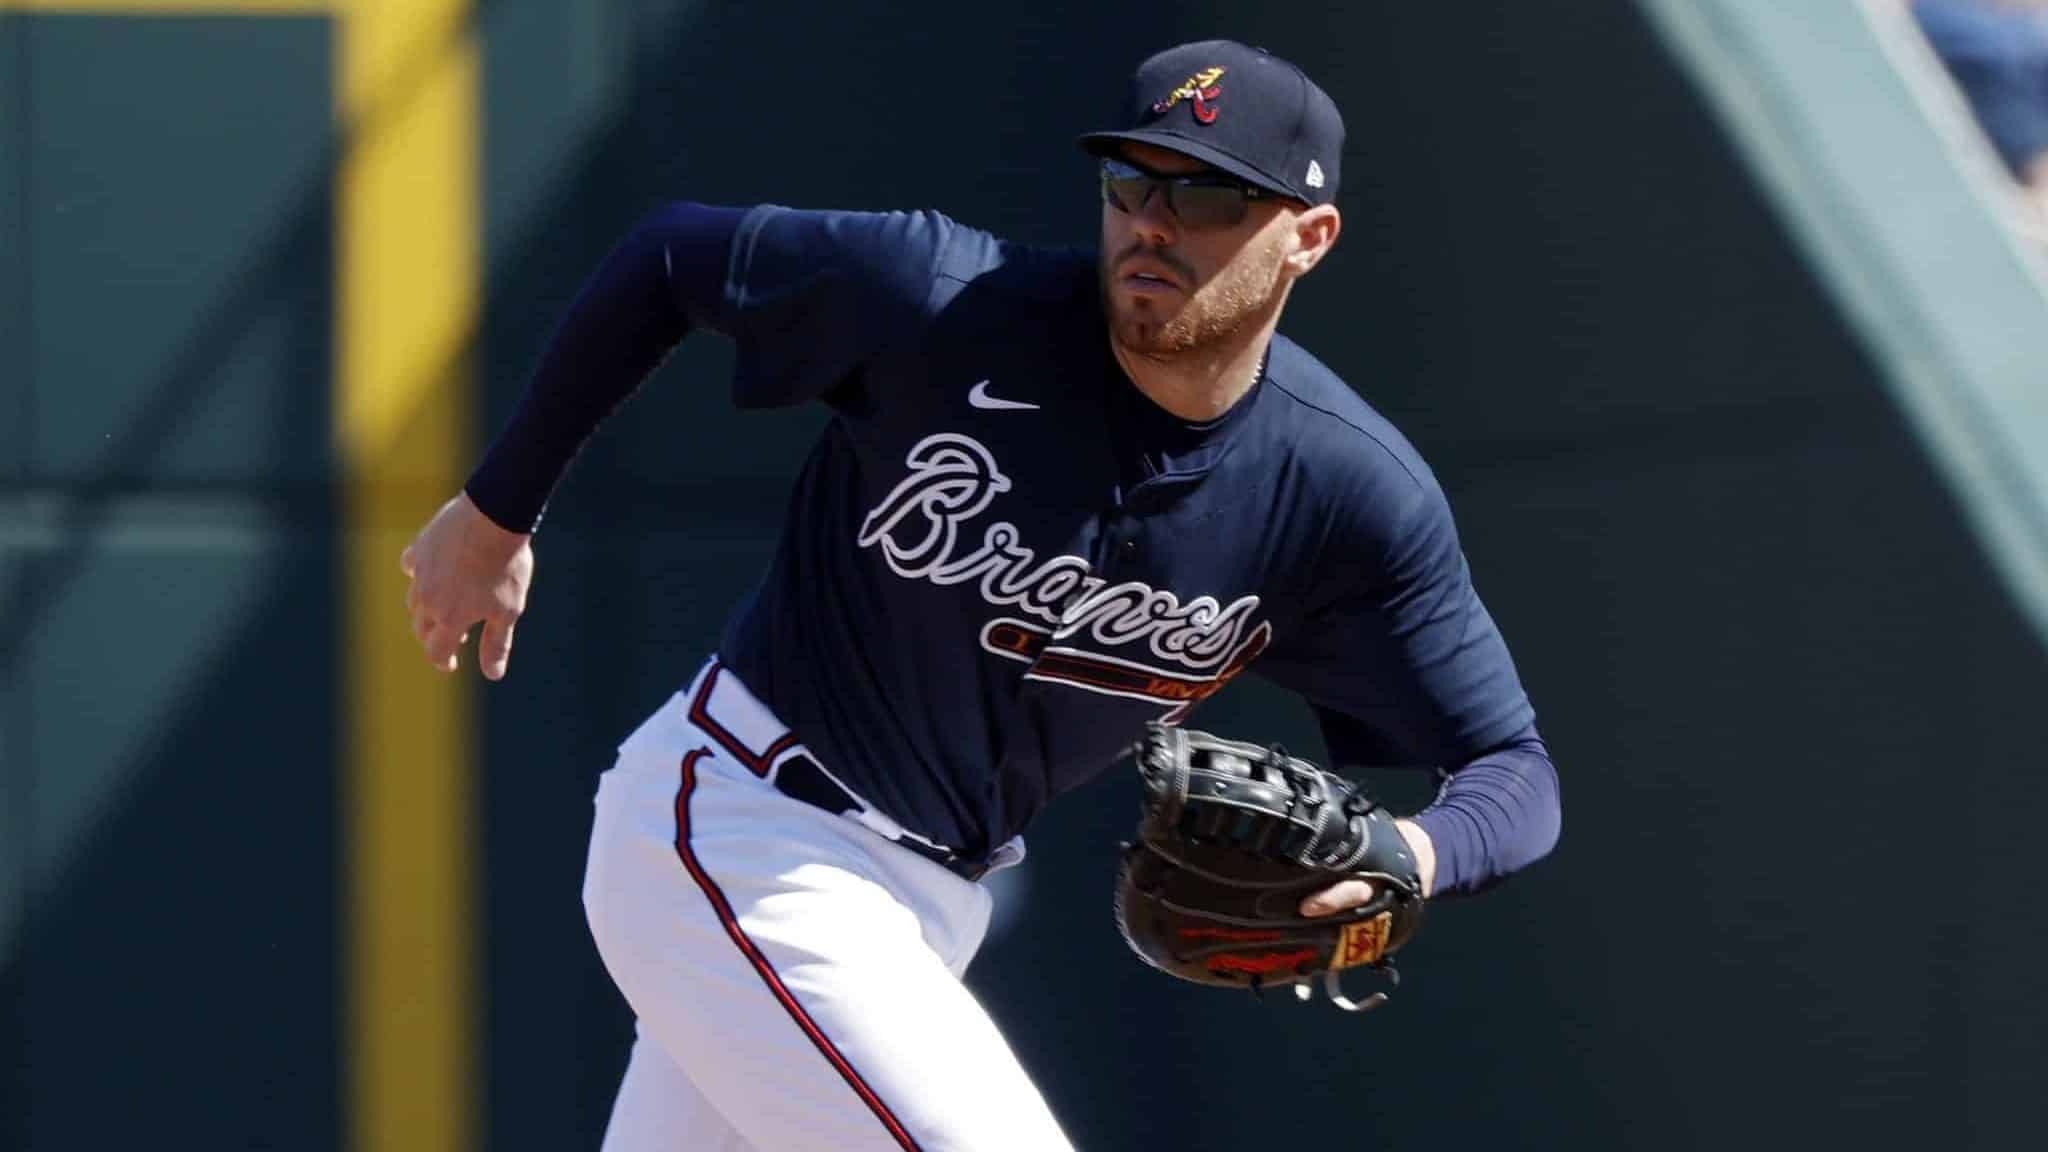 NORTH PORT, FL - FEBRUARY 22: Freddie Freeman #5 of the Atlanta Braves plays defense at first base in the third inning of a Grapefruit League spring training game against the Baltimore Orioles at CoolToday Park on February 22, 2020 in North Port, Florida. The Braves defeated the Orioles 5-0. New York Mets